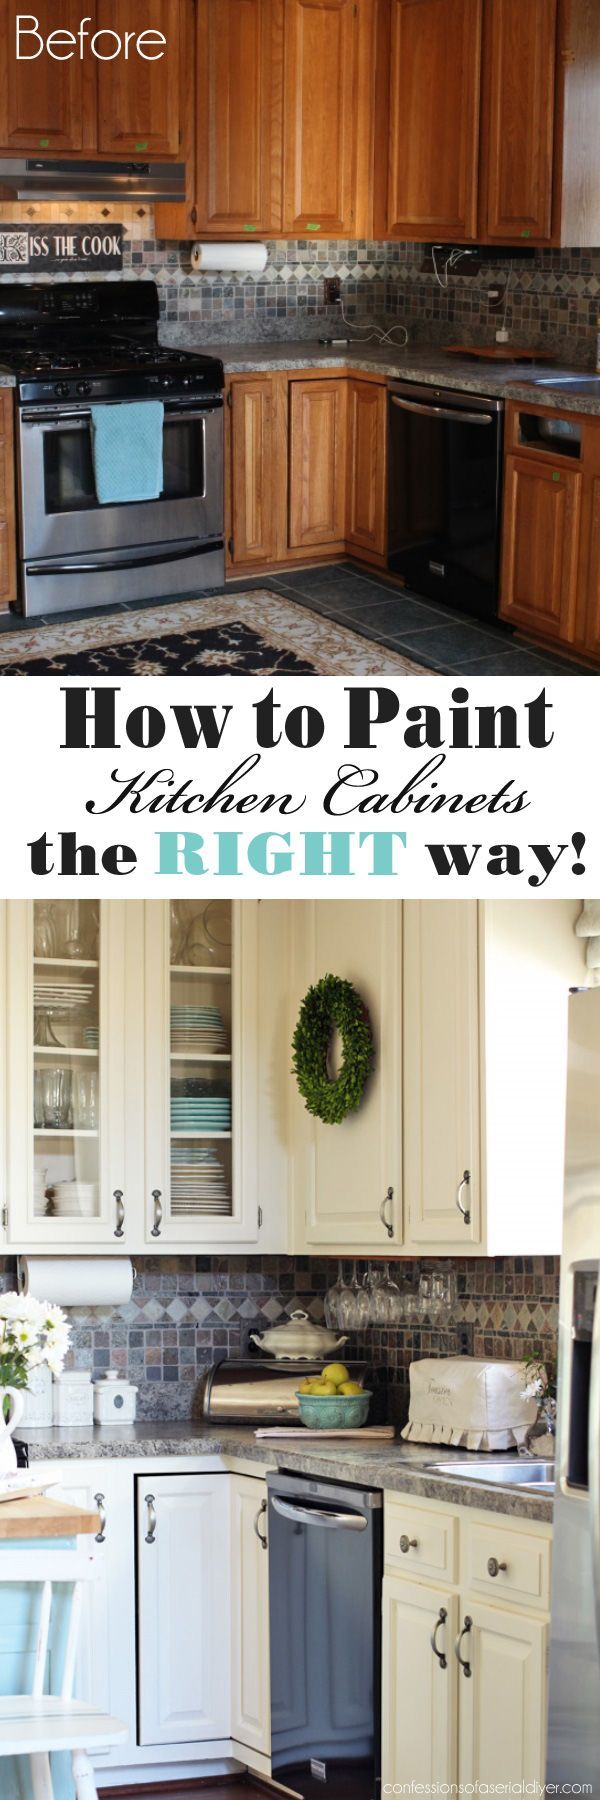 How to Paint Kitchen Cabinets the RIGHT way from Confessions of a Serial Do-it-Yourselfer